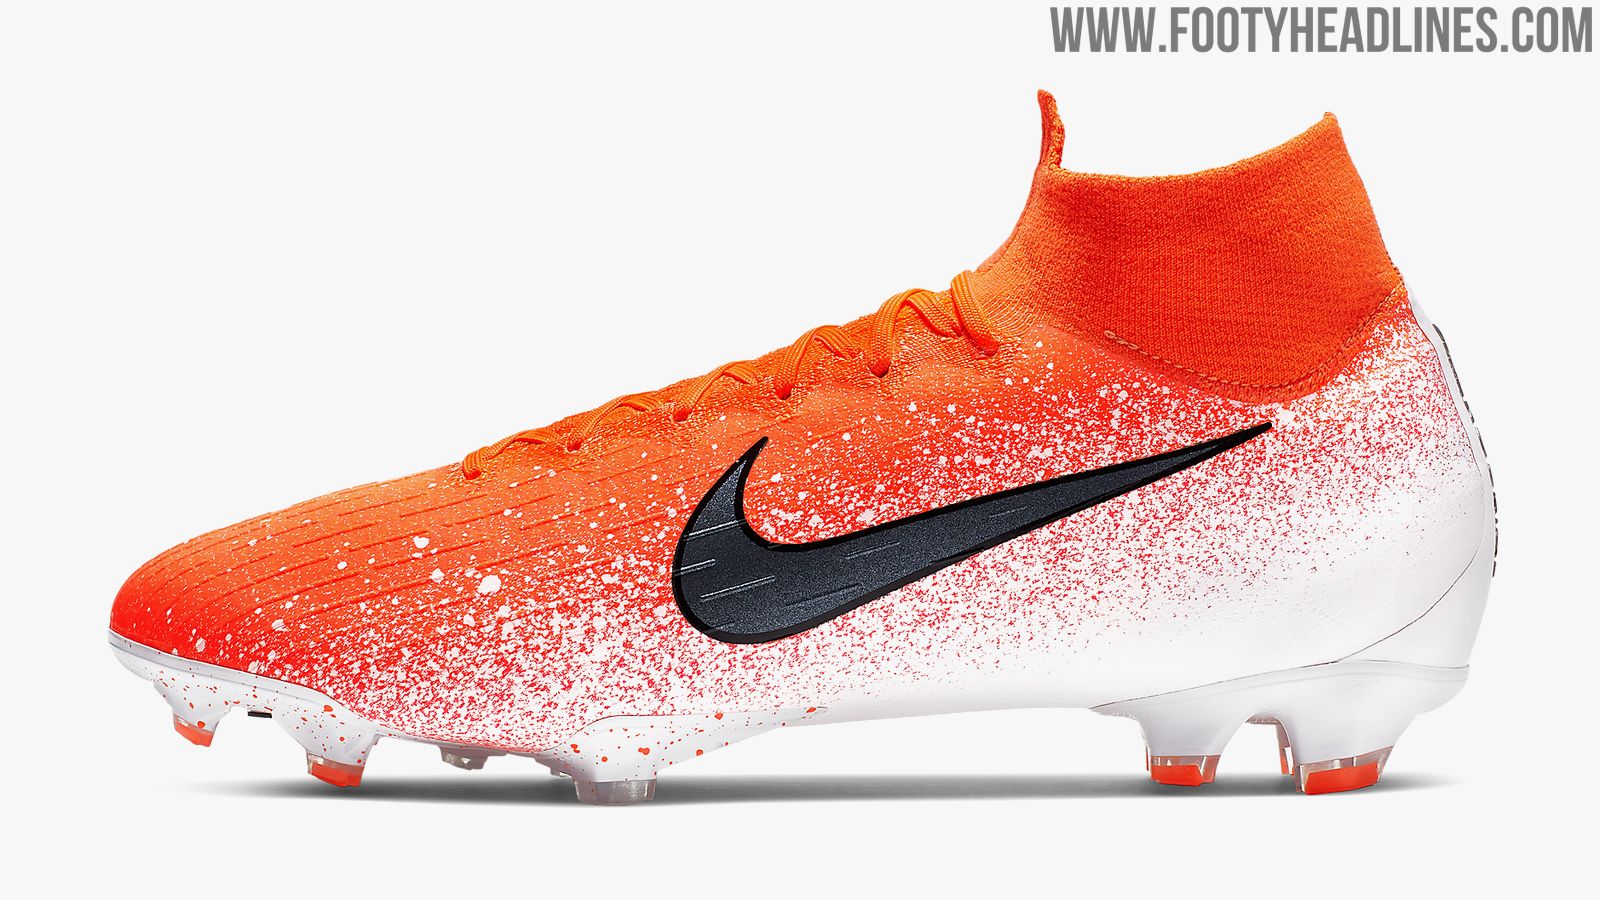 alimentar Entretenimiento queso Orange & White Nike Mercurial Superfly VI 'Euphoria Pack' 2019 Boots  Revealed - Footy Headlines